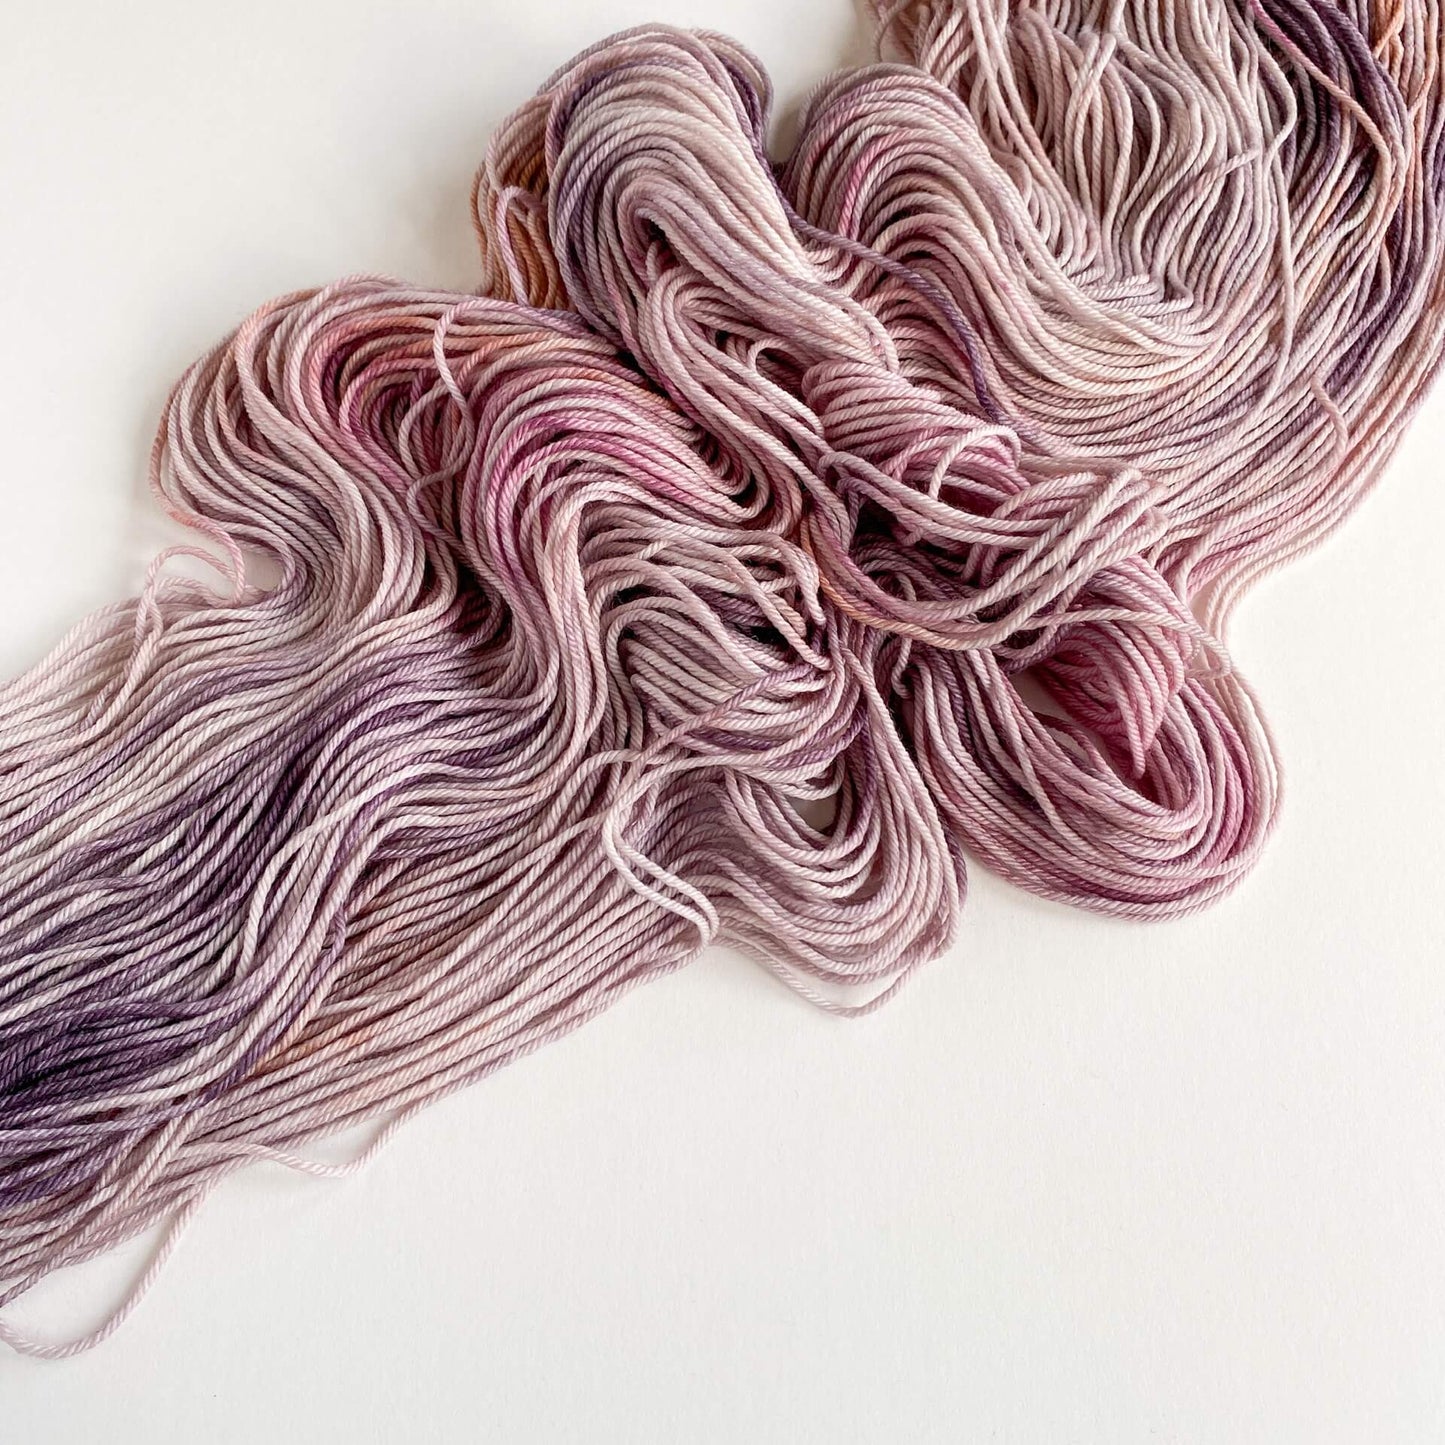 A skein of yarn lies unwound on a white background. They yarn is coloured with pinks and purples. 